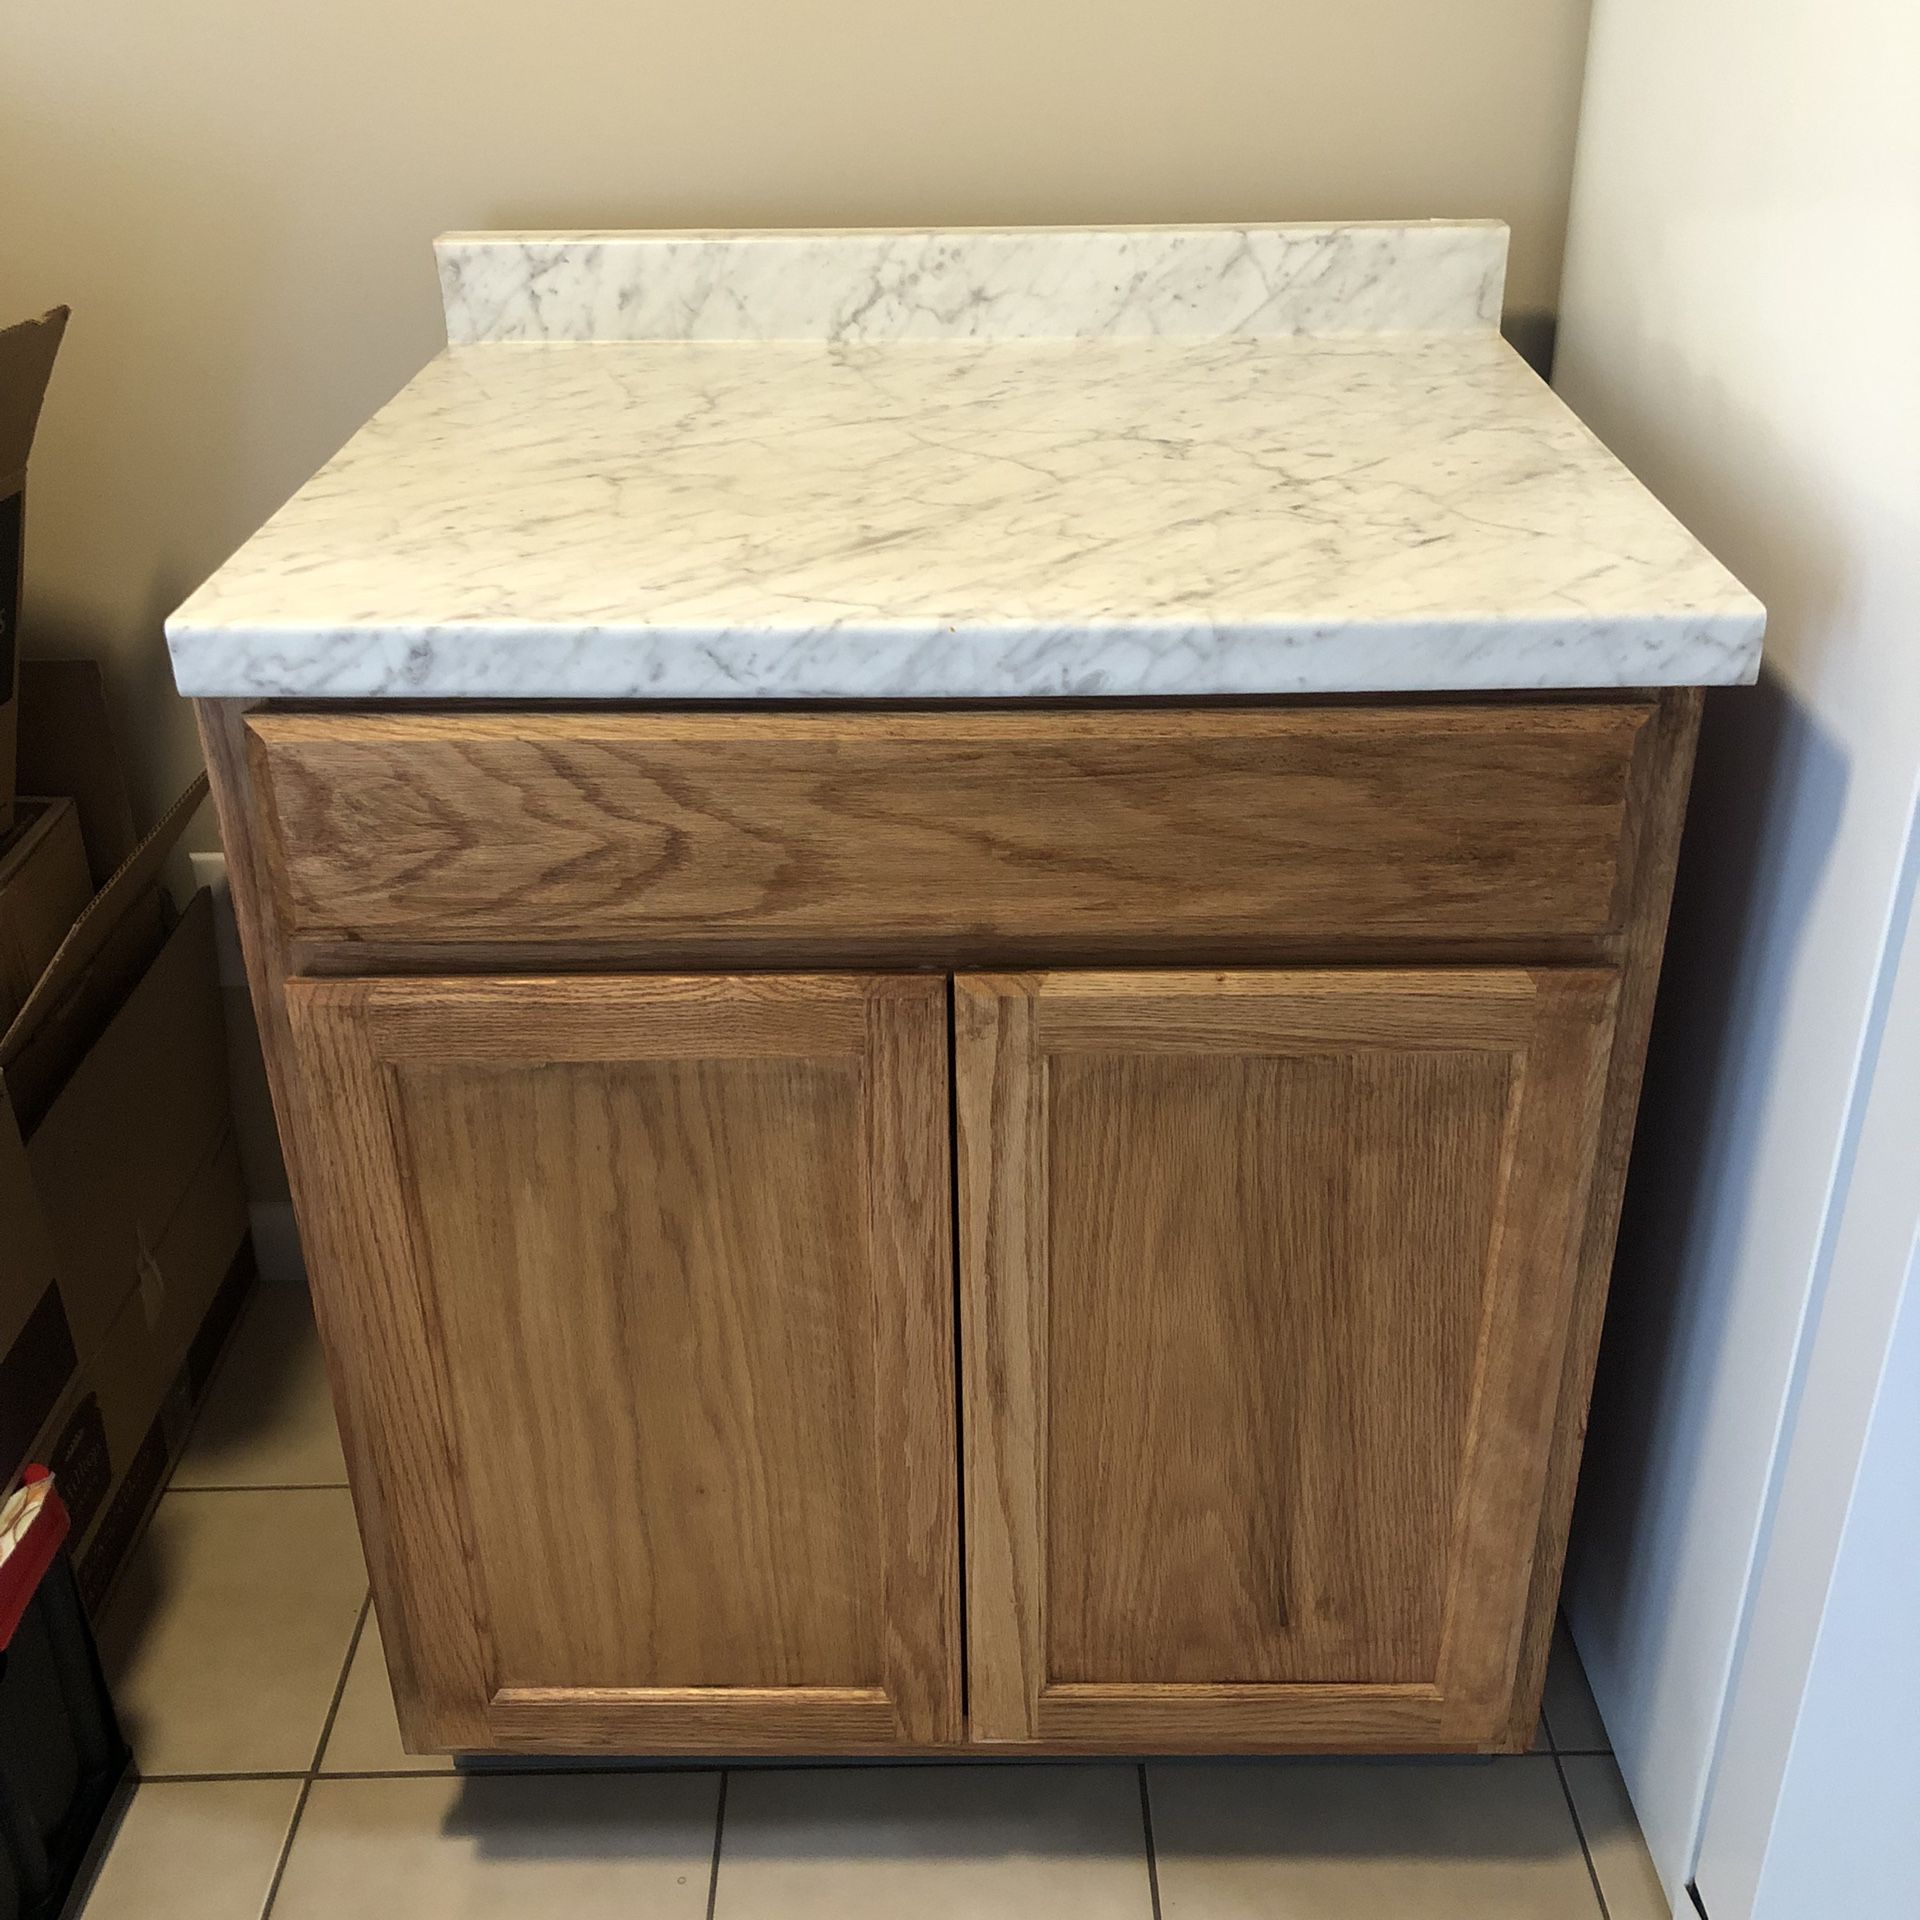 Wooden Cabinet with Laminate Countertop  MUST PICKUP BY TUESDAY 5/7